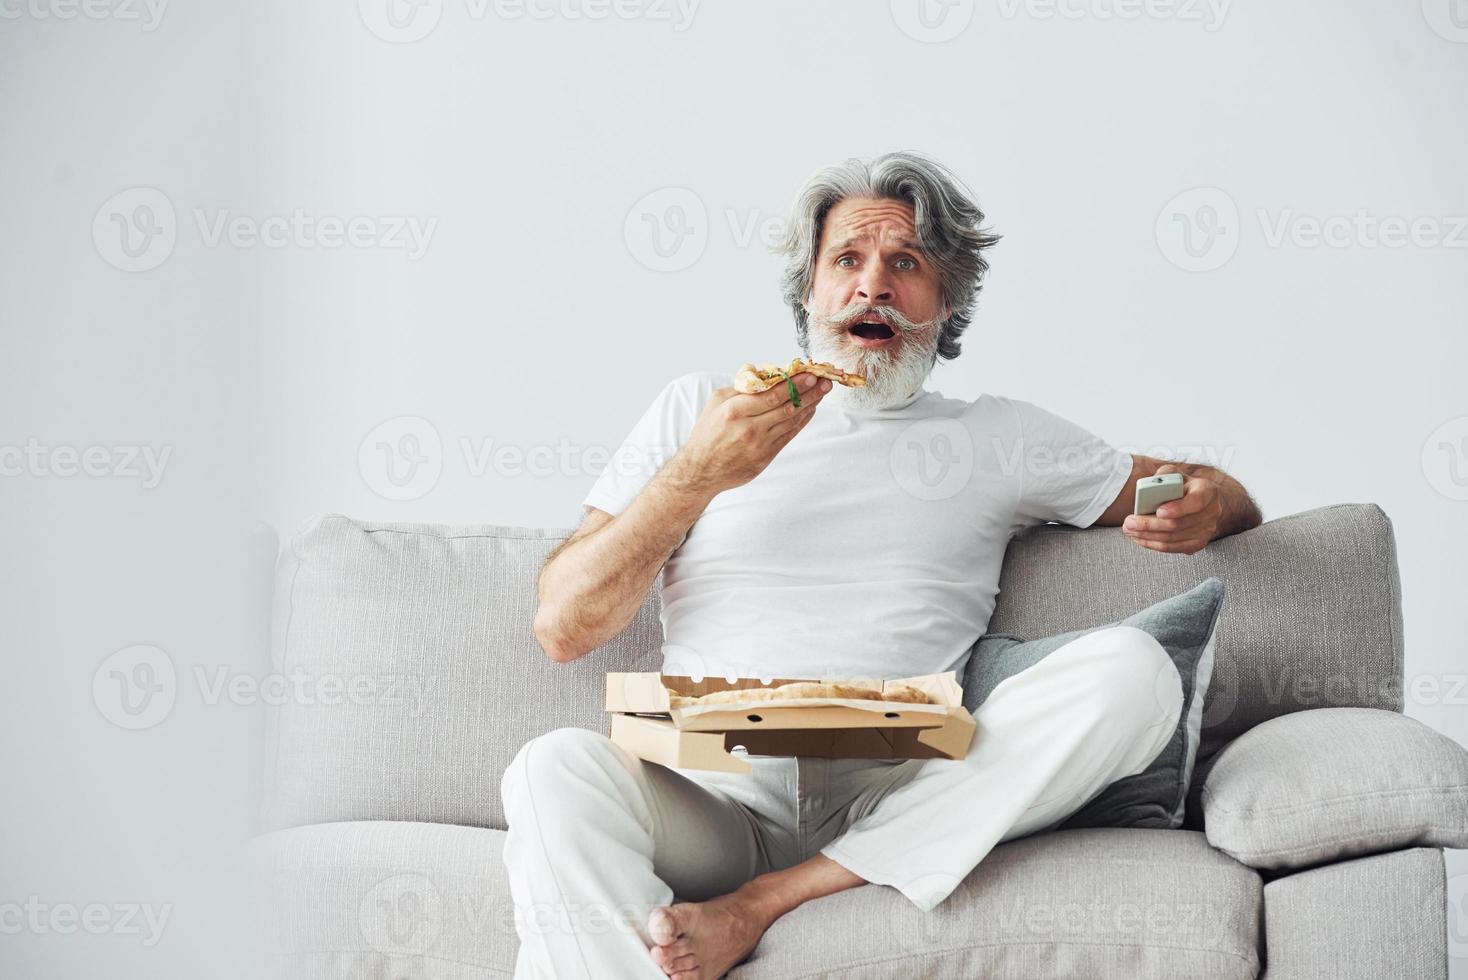 With delicious pizza. Watches TV show. Senior stylish modern man with grey hair and beard indoors photo